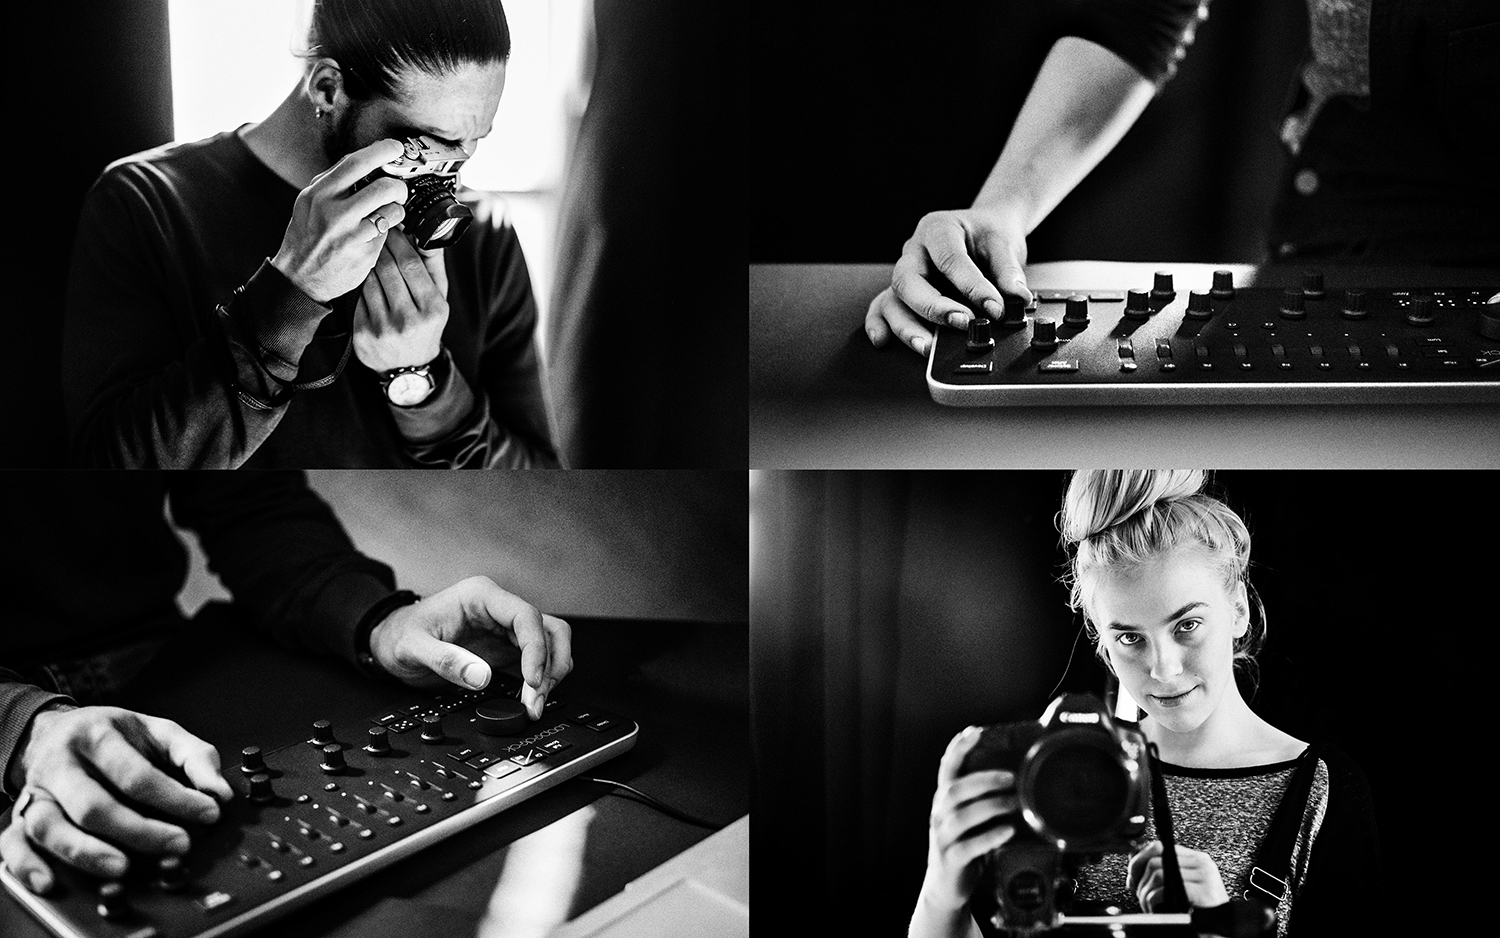 Photography by Kaapo Kamu for photo editing editing console and start-up Loupedeck